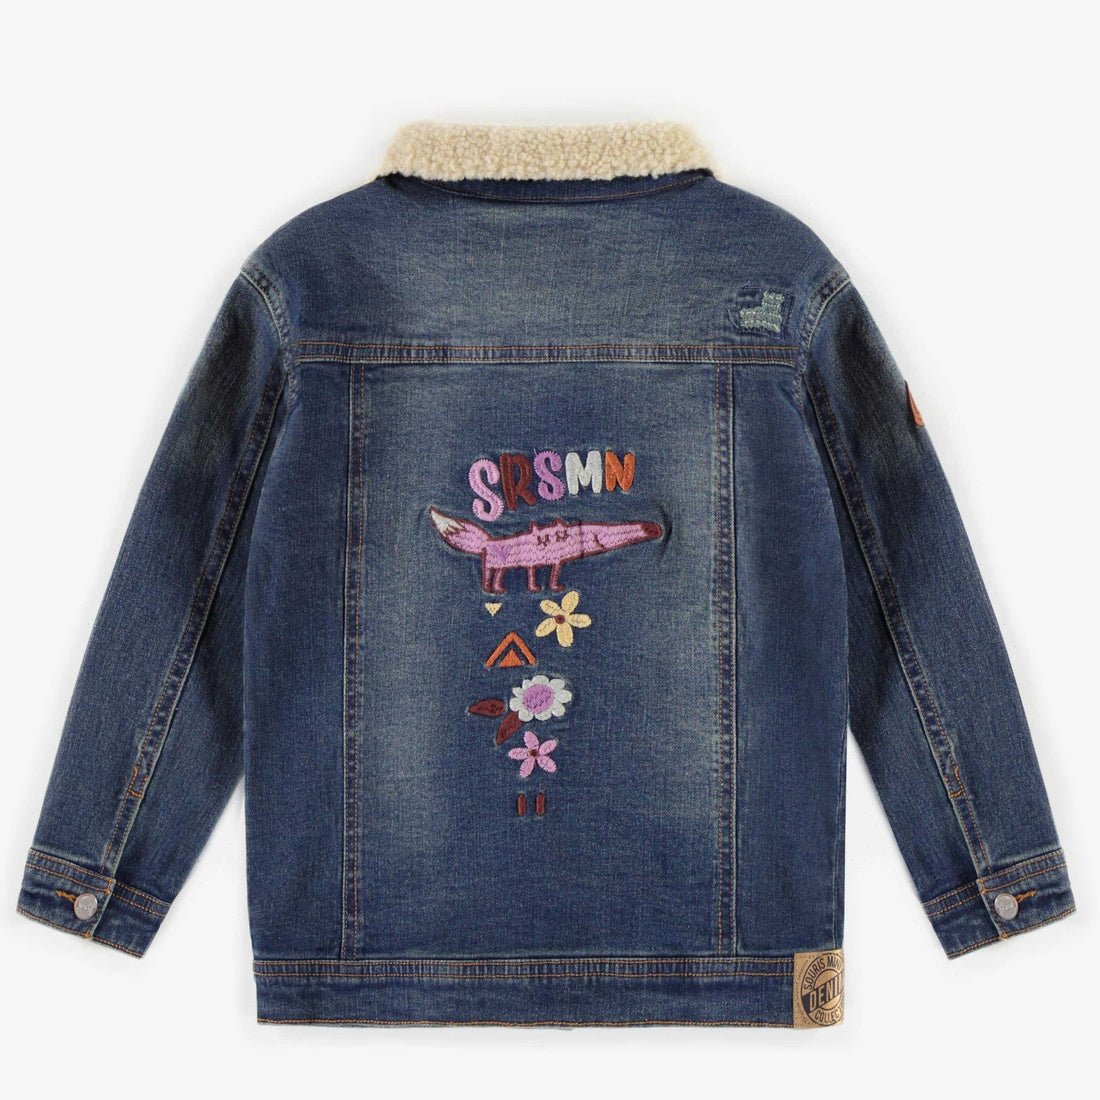 STRETCHY DENIM JACKET WITH EMBROIDERY GIRL, CHILD